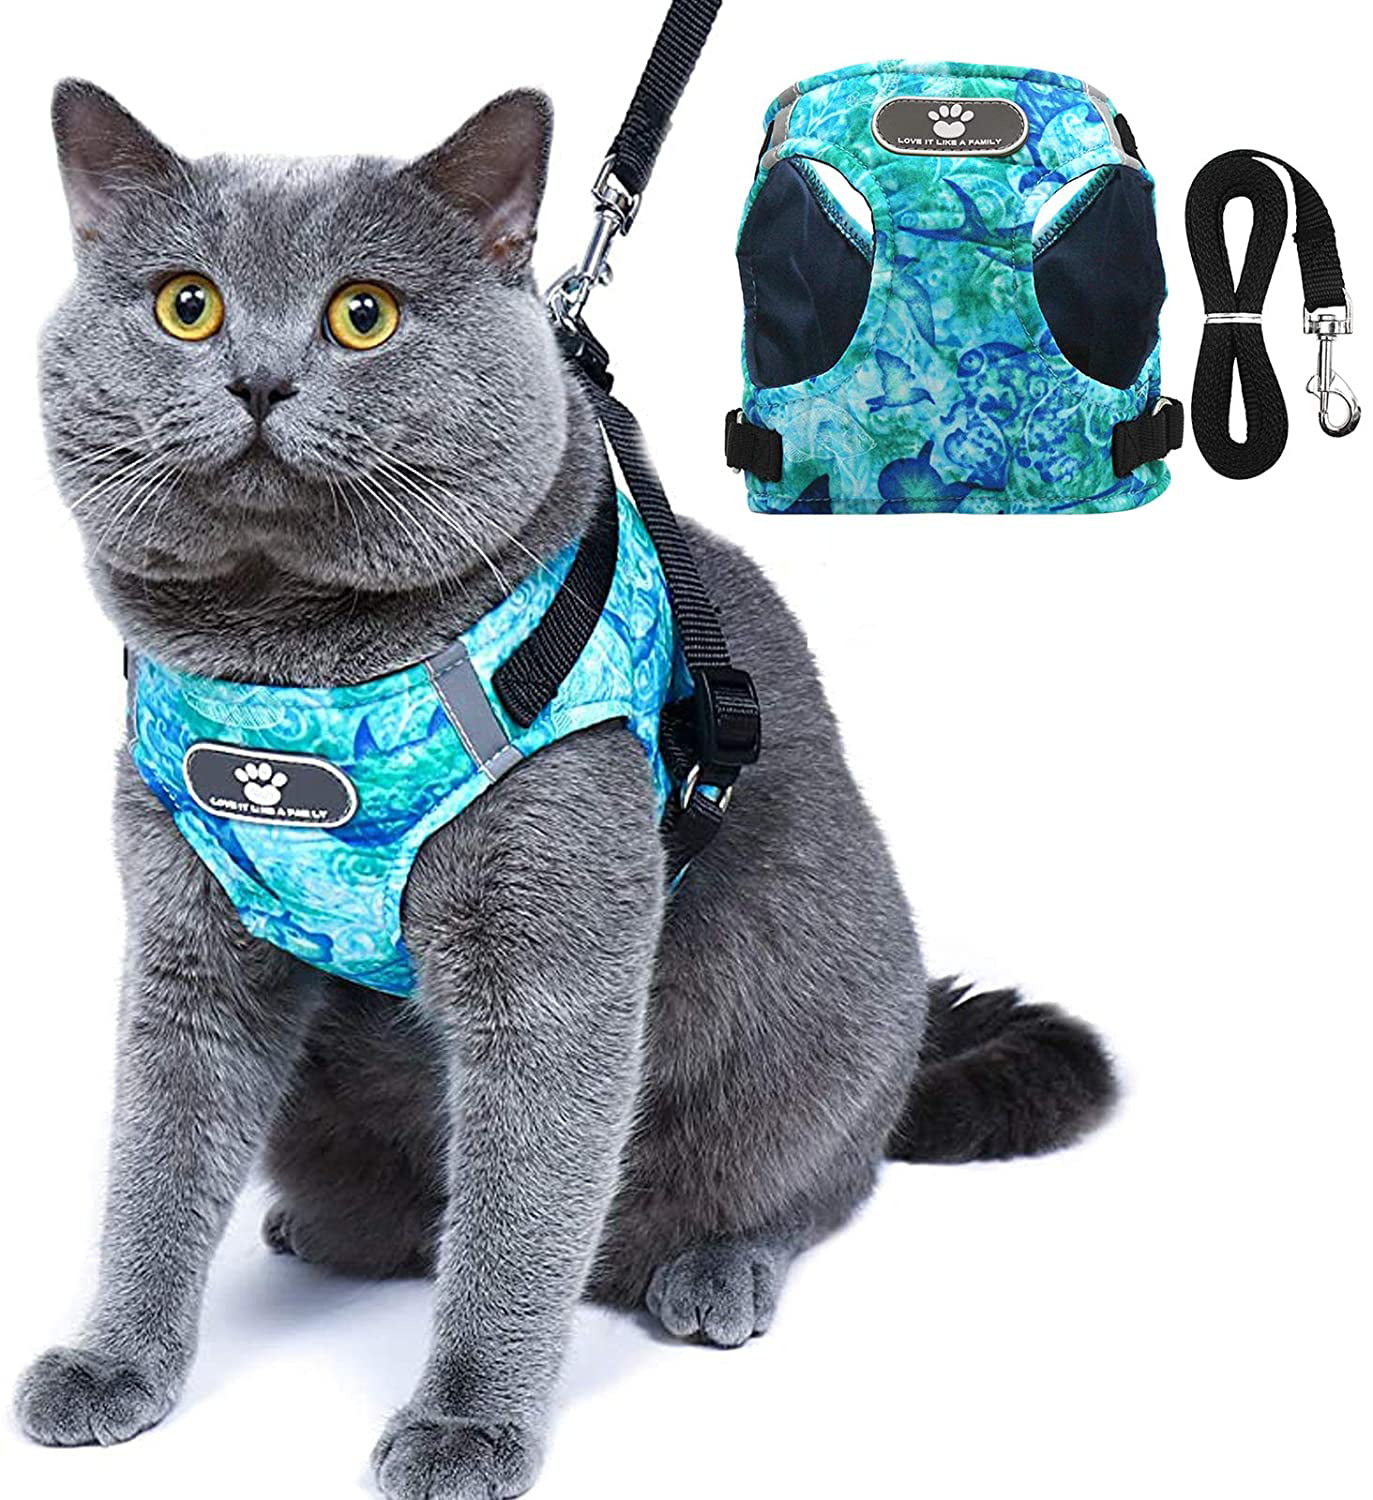 Reflective Cat Harness for Walking Adjustable Vest Harnesses Pet Kitten Traction Rope with &1 Metal Leash Ring Small Cats Soft Mesh Harness 